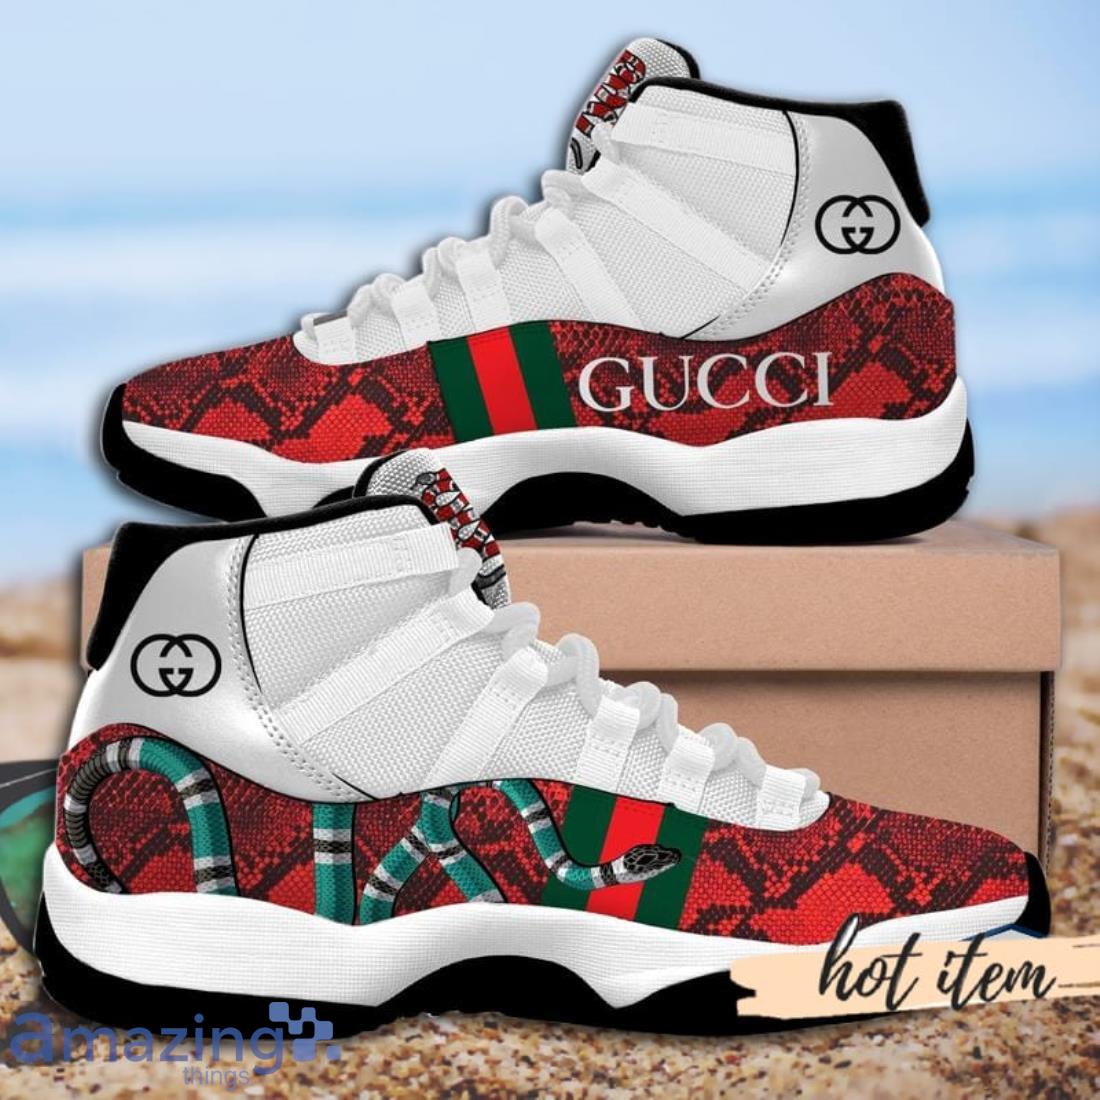 NEW FASHION] Gucci Air Jordan 11 Sneakers Shoes Hot 2023 For Men Women  Limited Edition New